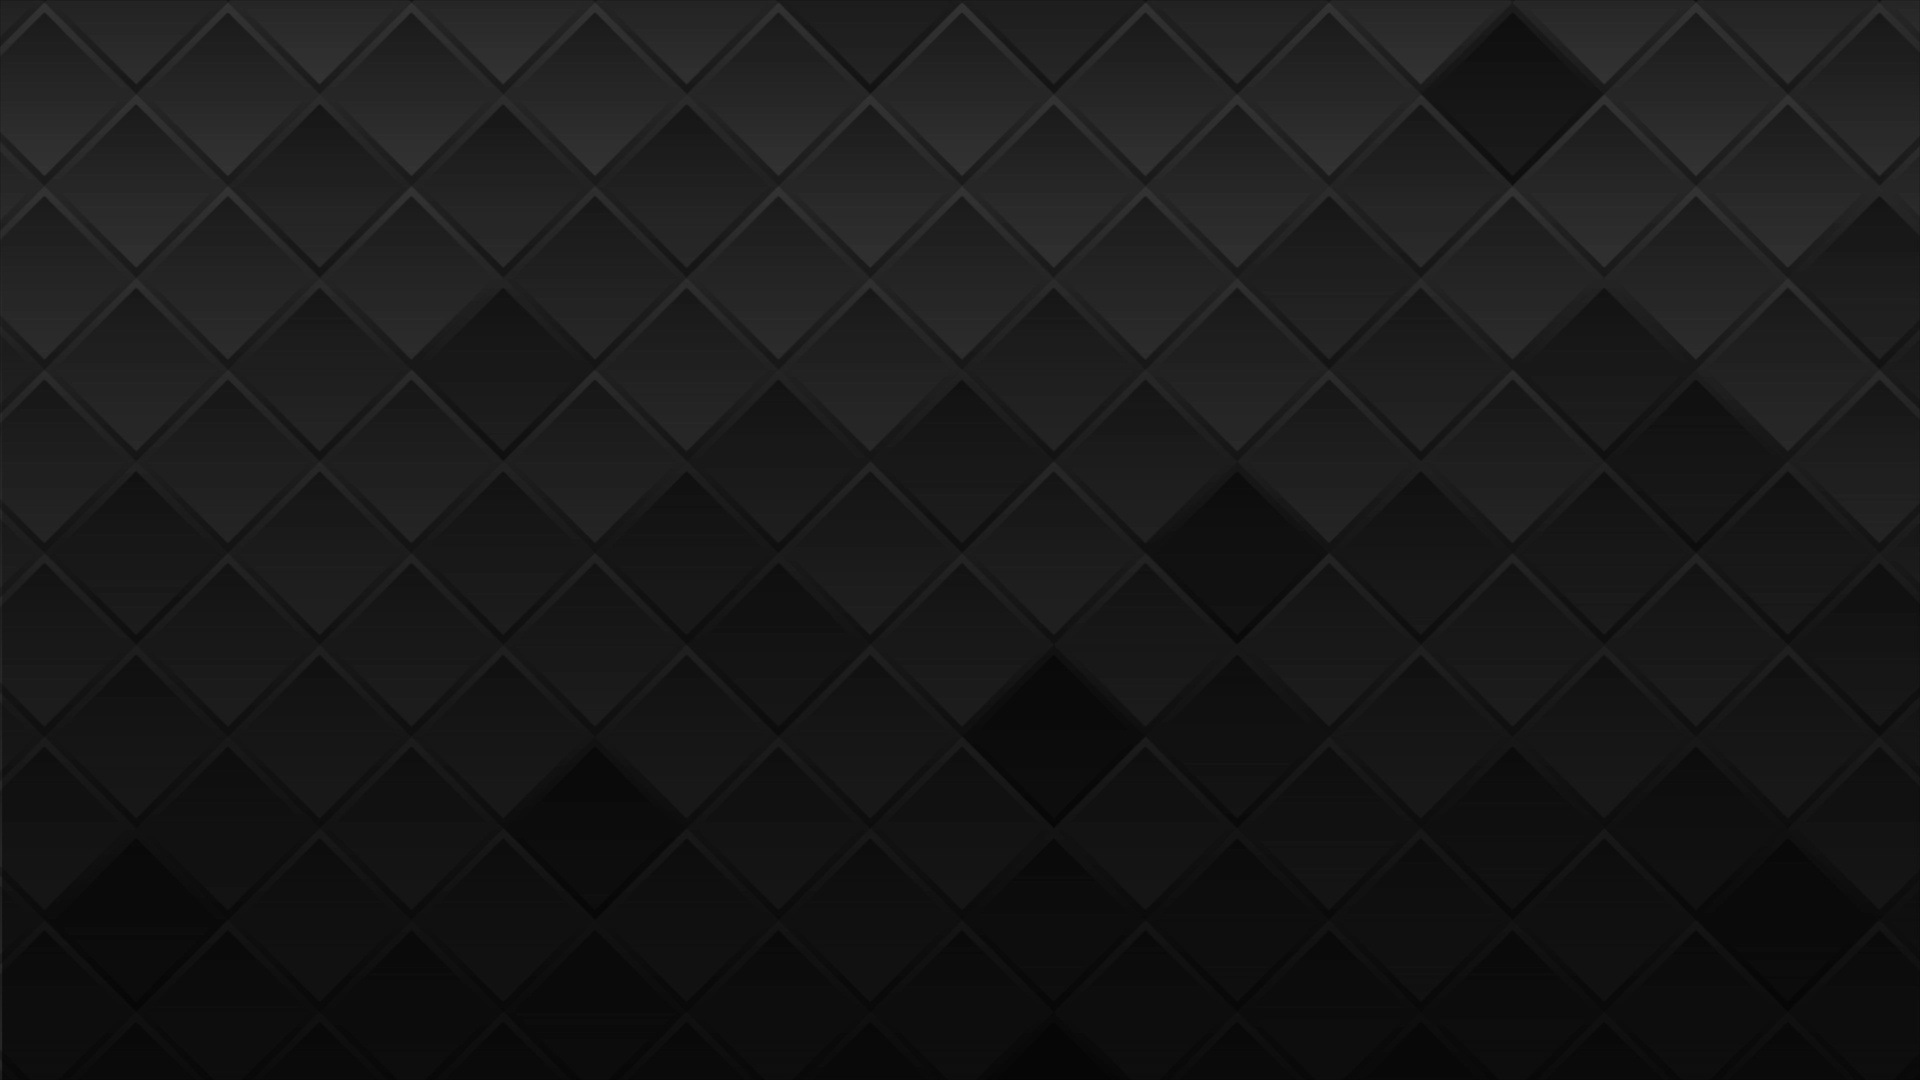 Black Geometric Squares Abstract Technology Background